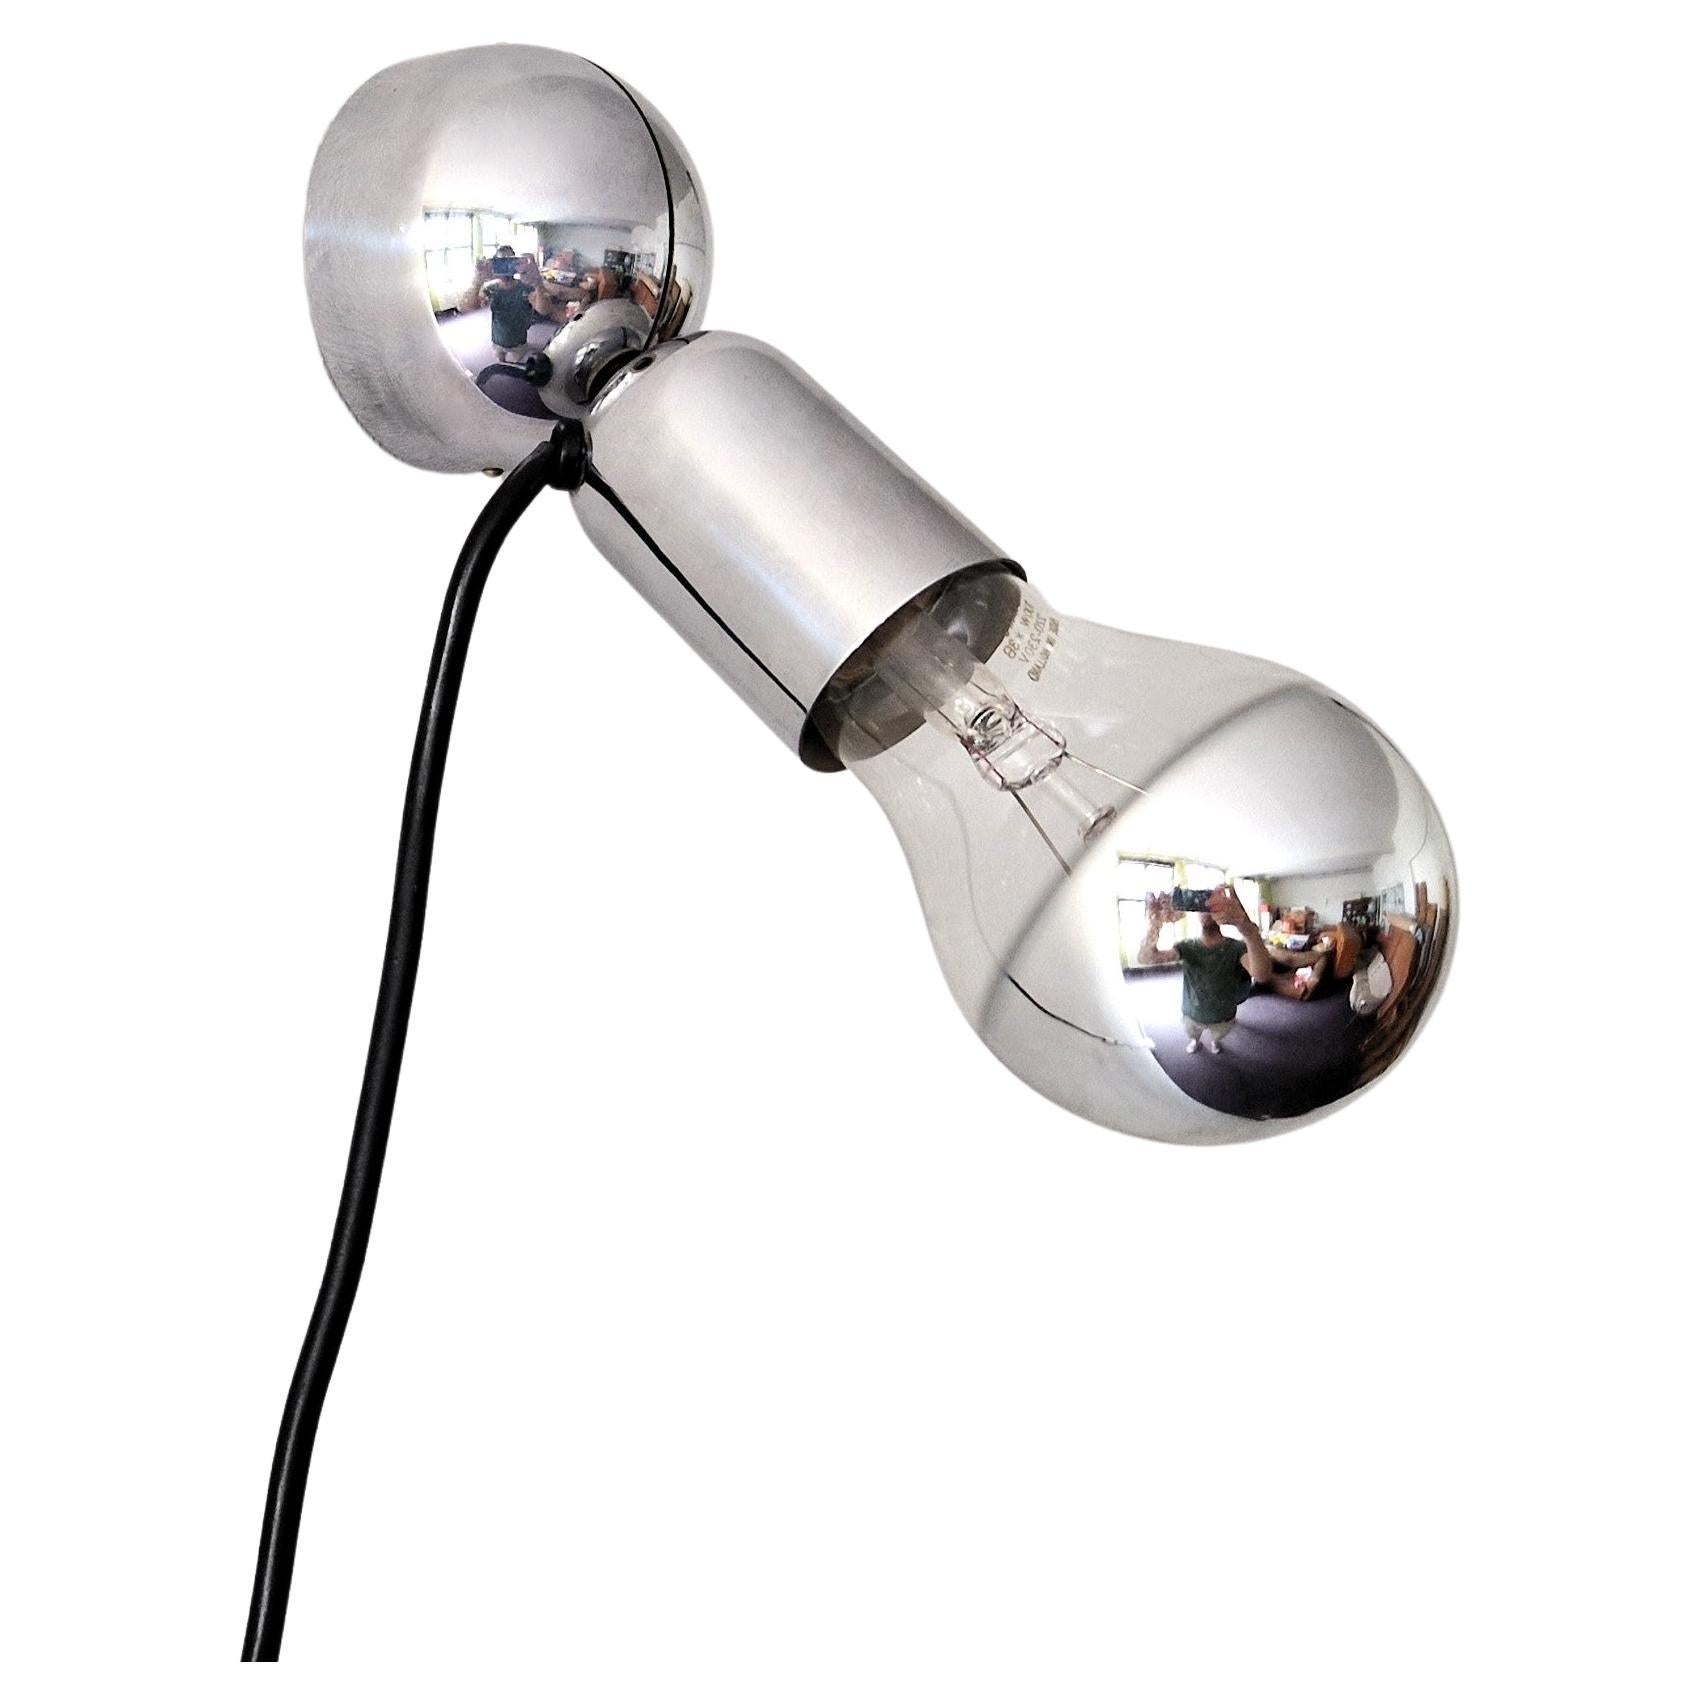 This great light called 'Pollux' was one of the first designs by Ingo Maurer for his company Design M in 1967. The design is based on the Pop-art influences and Maurer's fascination for the bare bulb. It is made out of chrome-plated metal and has a